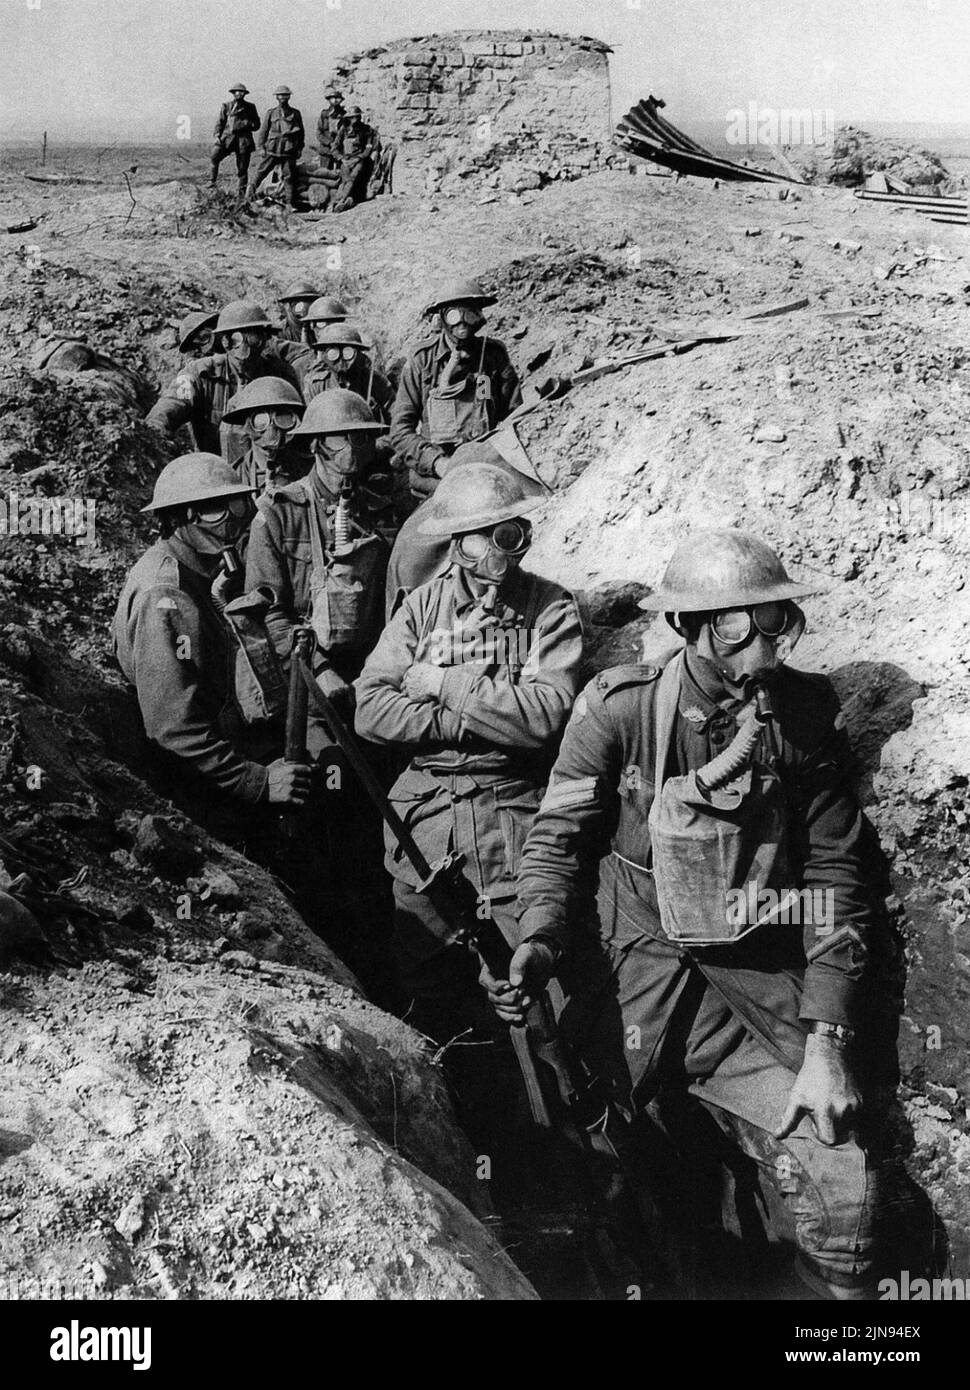 YPRES, BELGIUM - Summer 1917 - Australian infantry soldiers wearing small box respirator gas masks in a trench in Ypres Belgium - Photo: Geopix Stock Photo